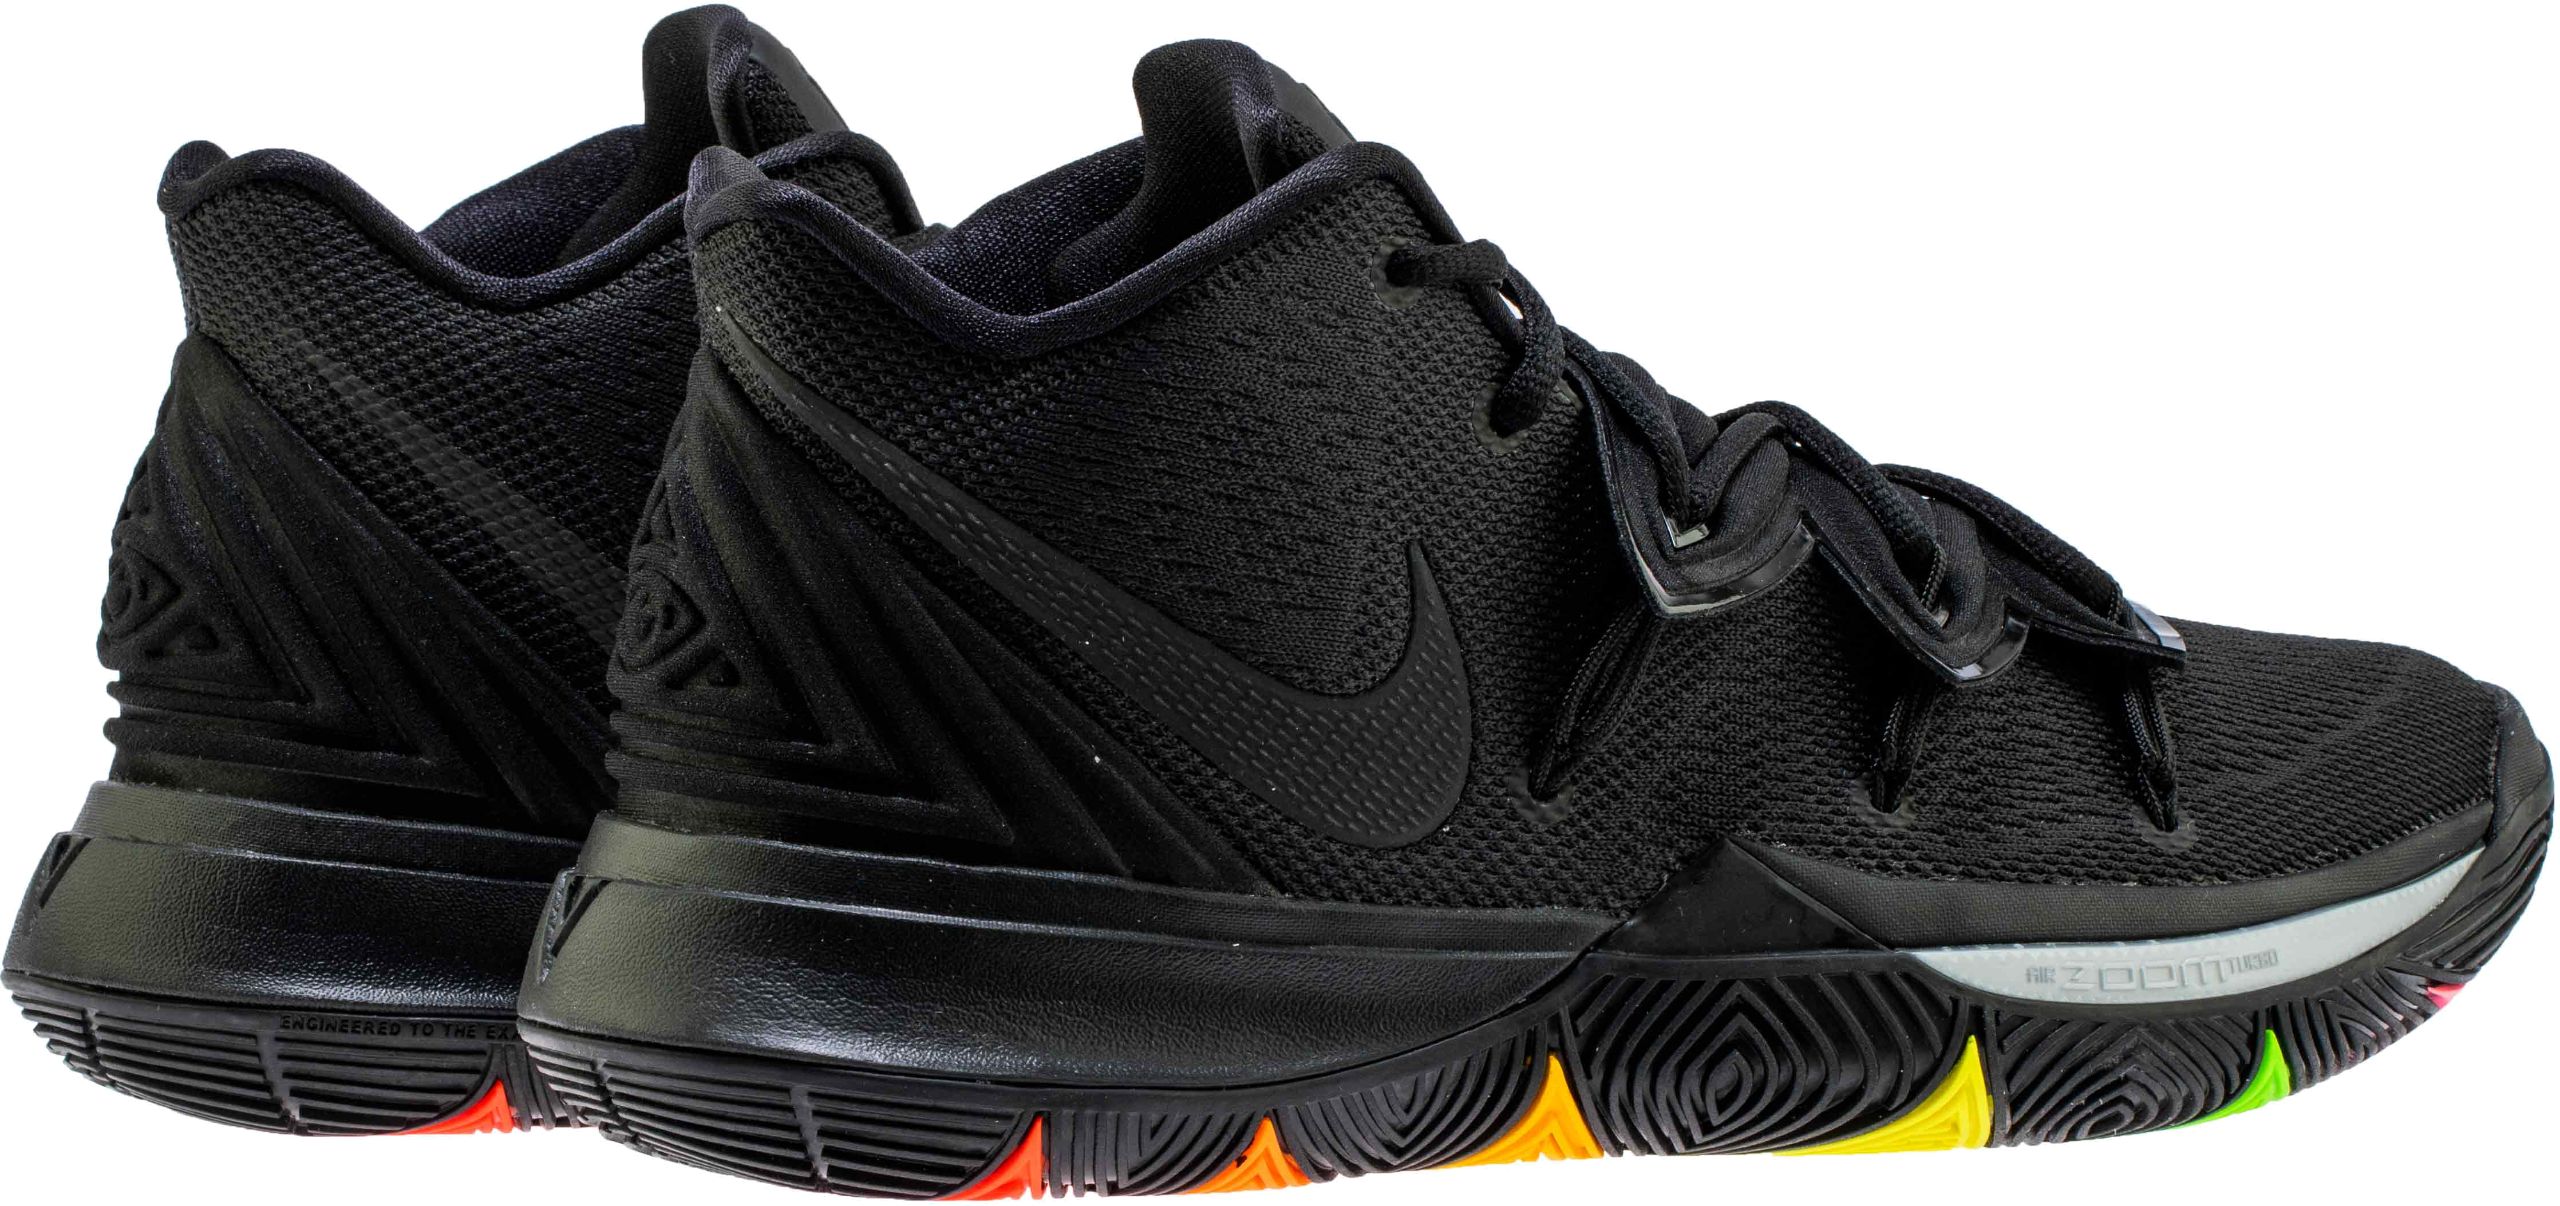 basketball shoes kyrie 5 cheap online